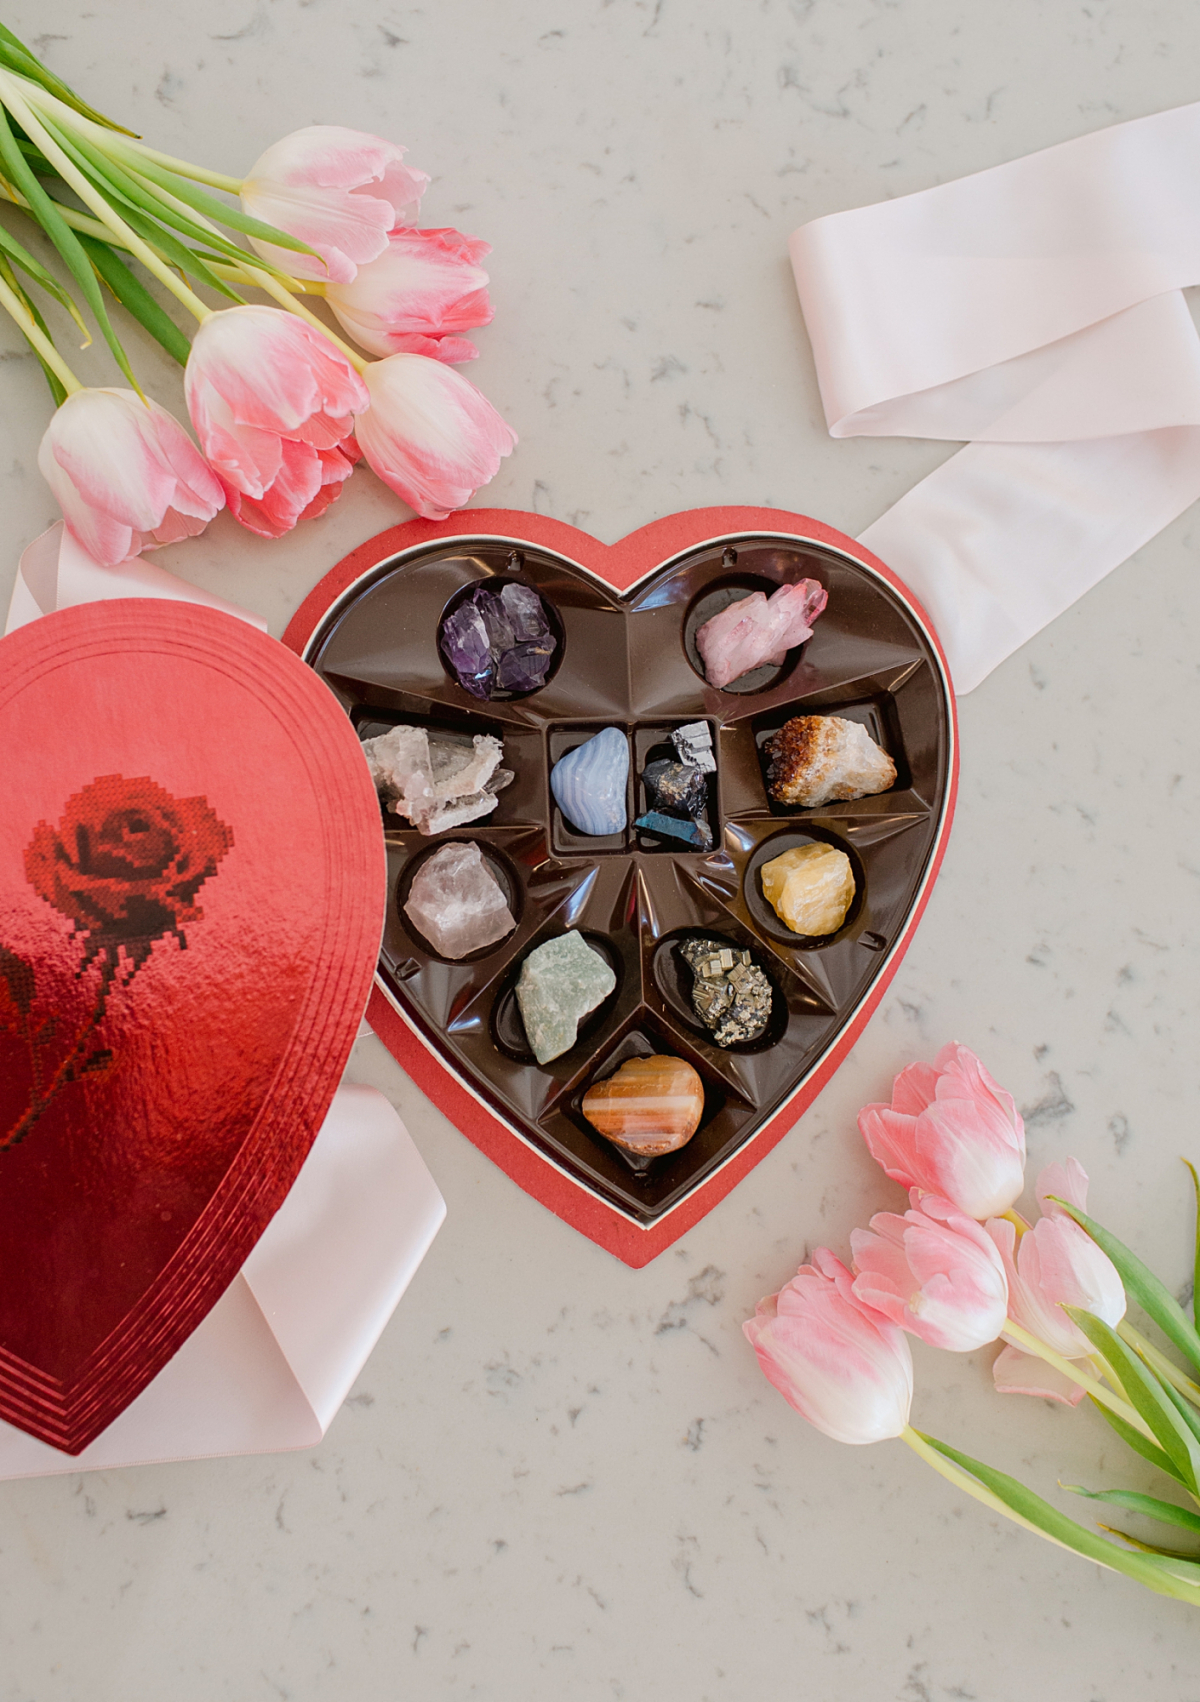 Valentine's Day Crystal Heart Gift Box, 8 Large 25x28mm Natural Heart  Gemstones, Mixed Stone Red Valentine's Box Giftset With Crinkle Paper